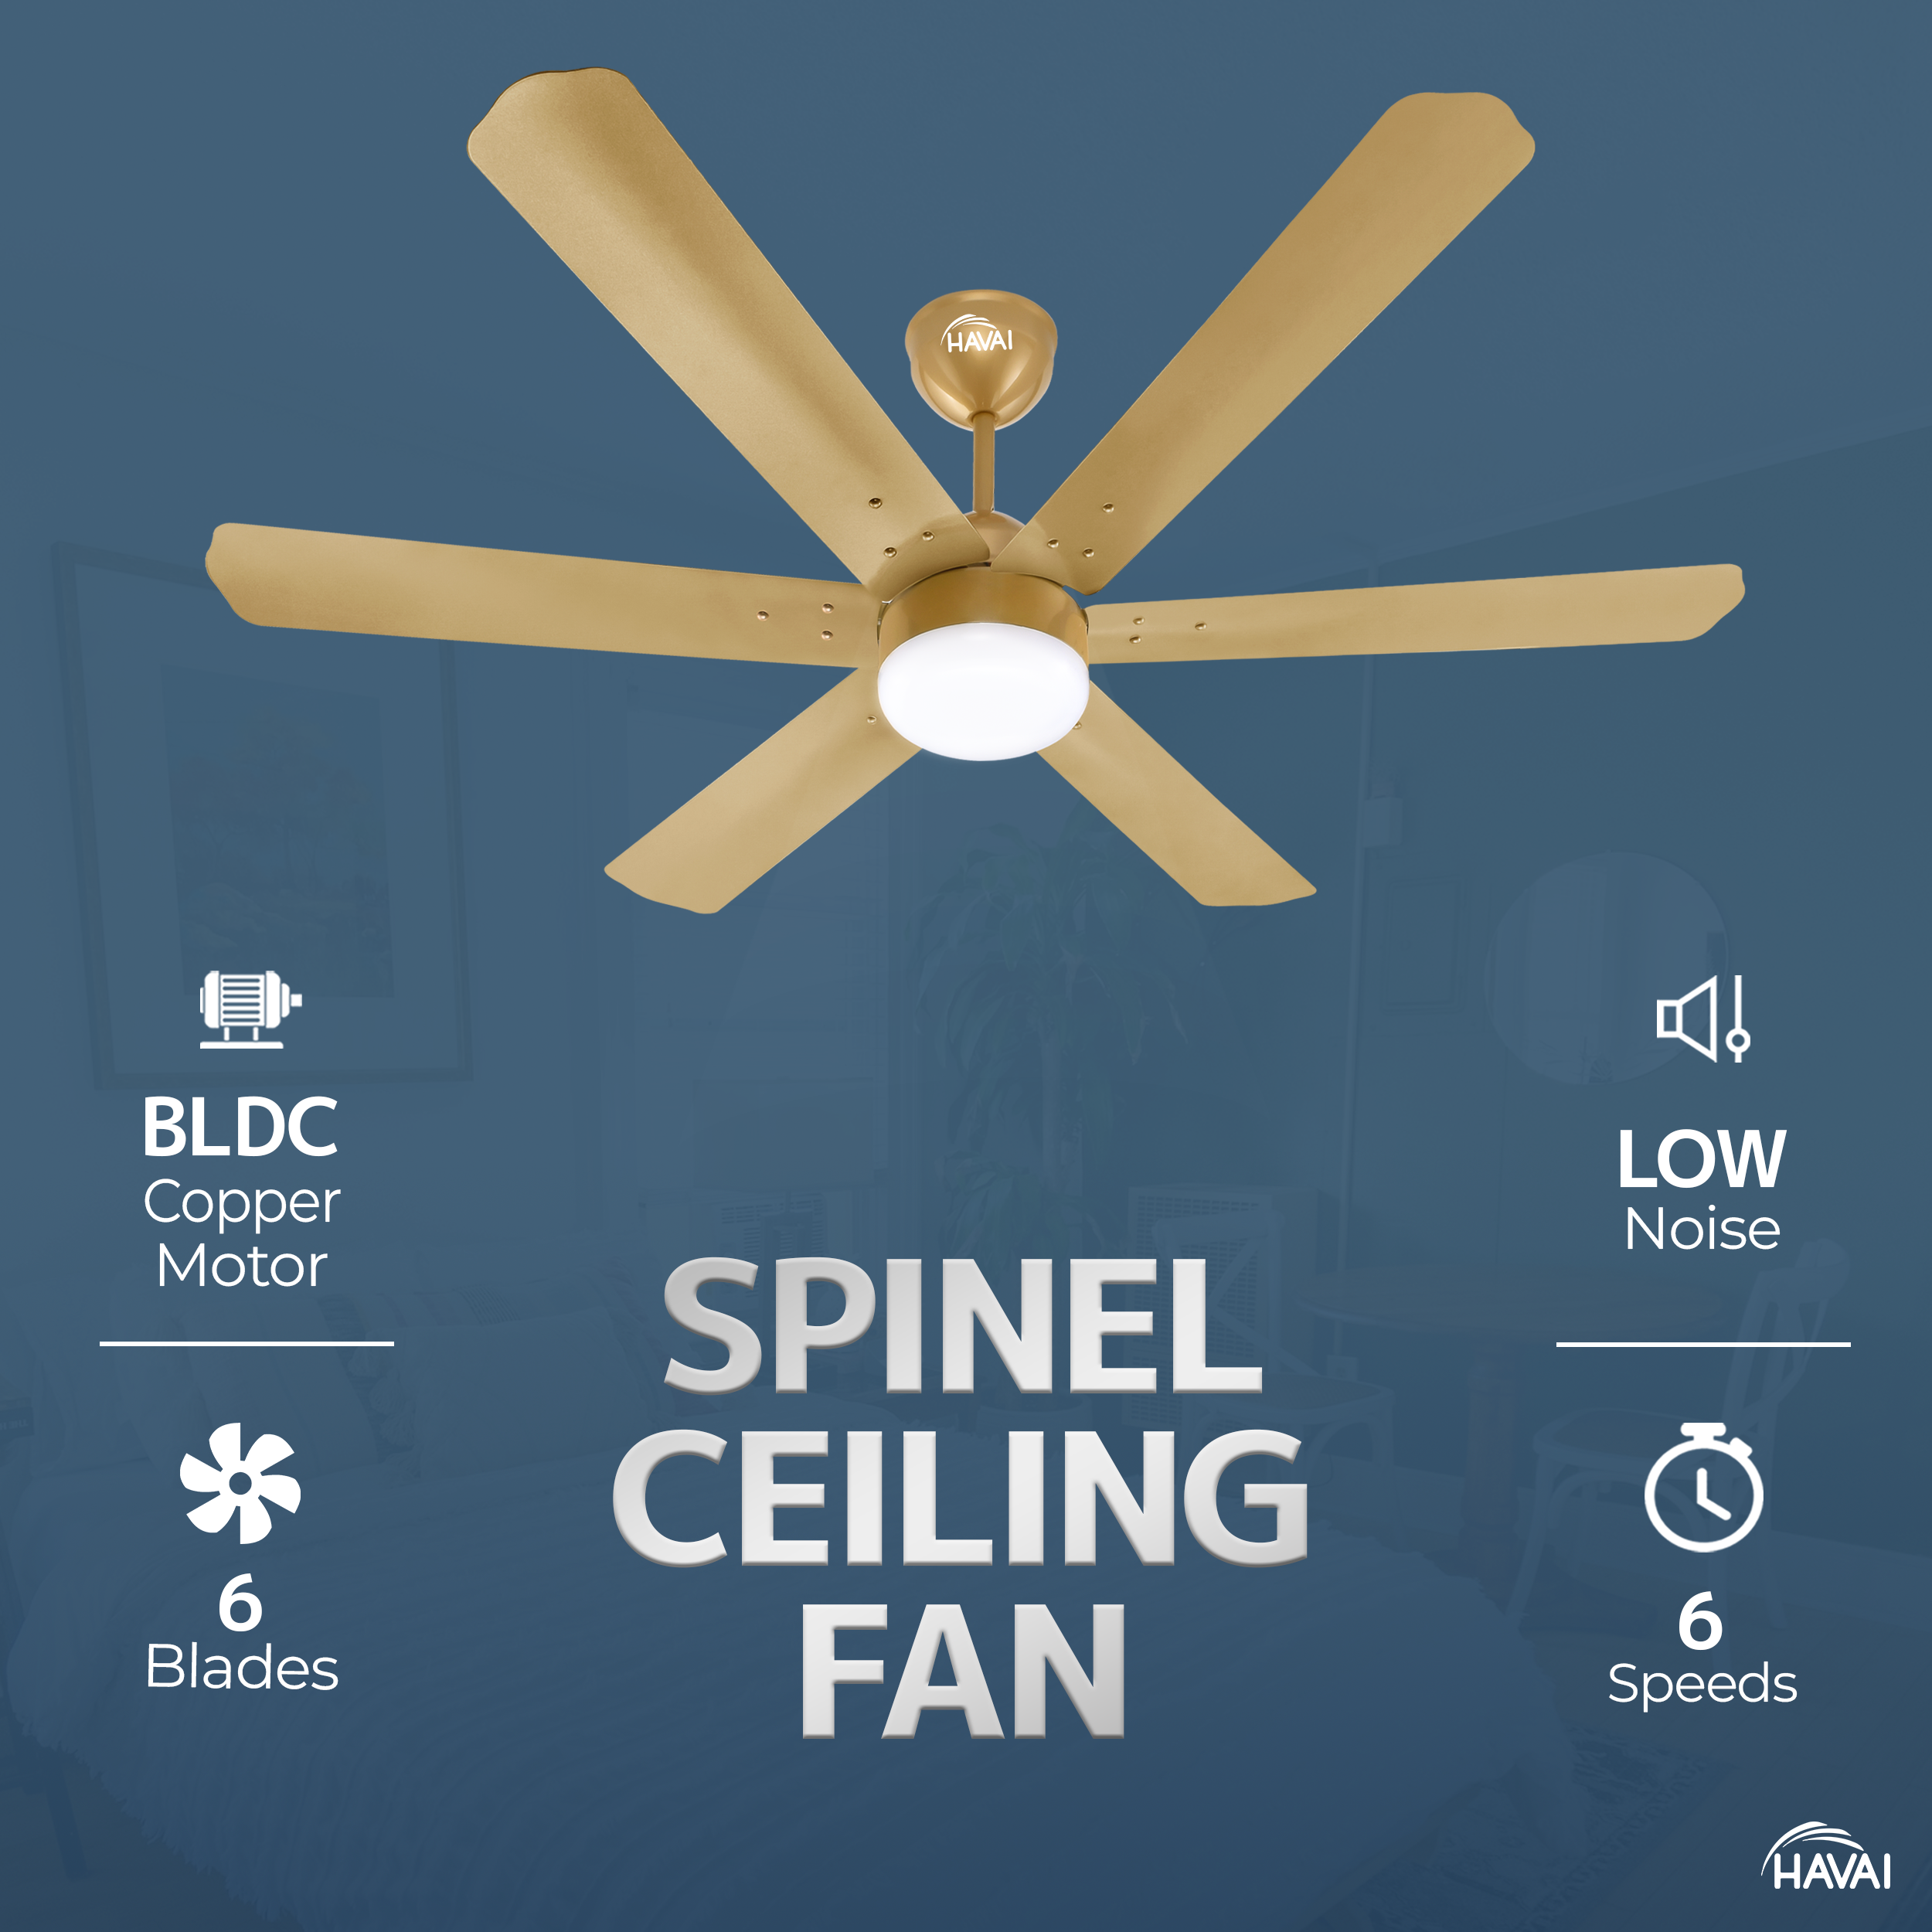 HAVAI Spinel BLDC Ceiling Fan 35W, 1200mm Blade with Remote - Champagne Yellow, 0.5W LED Light